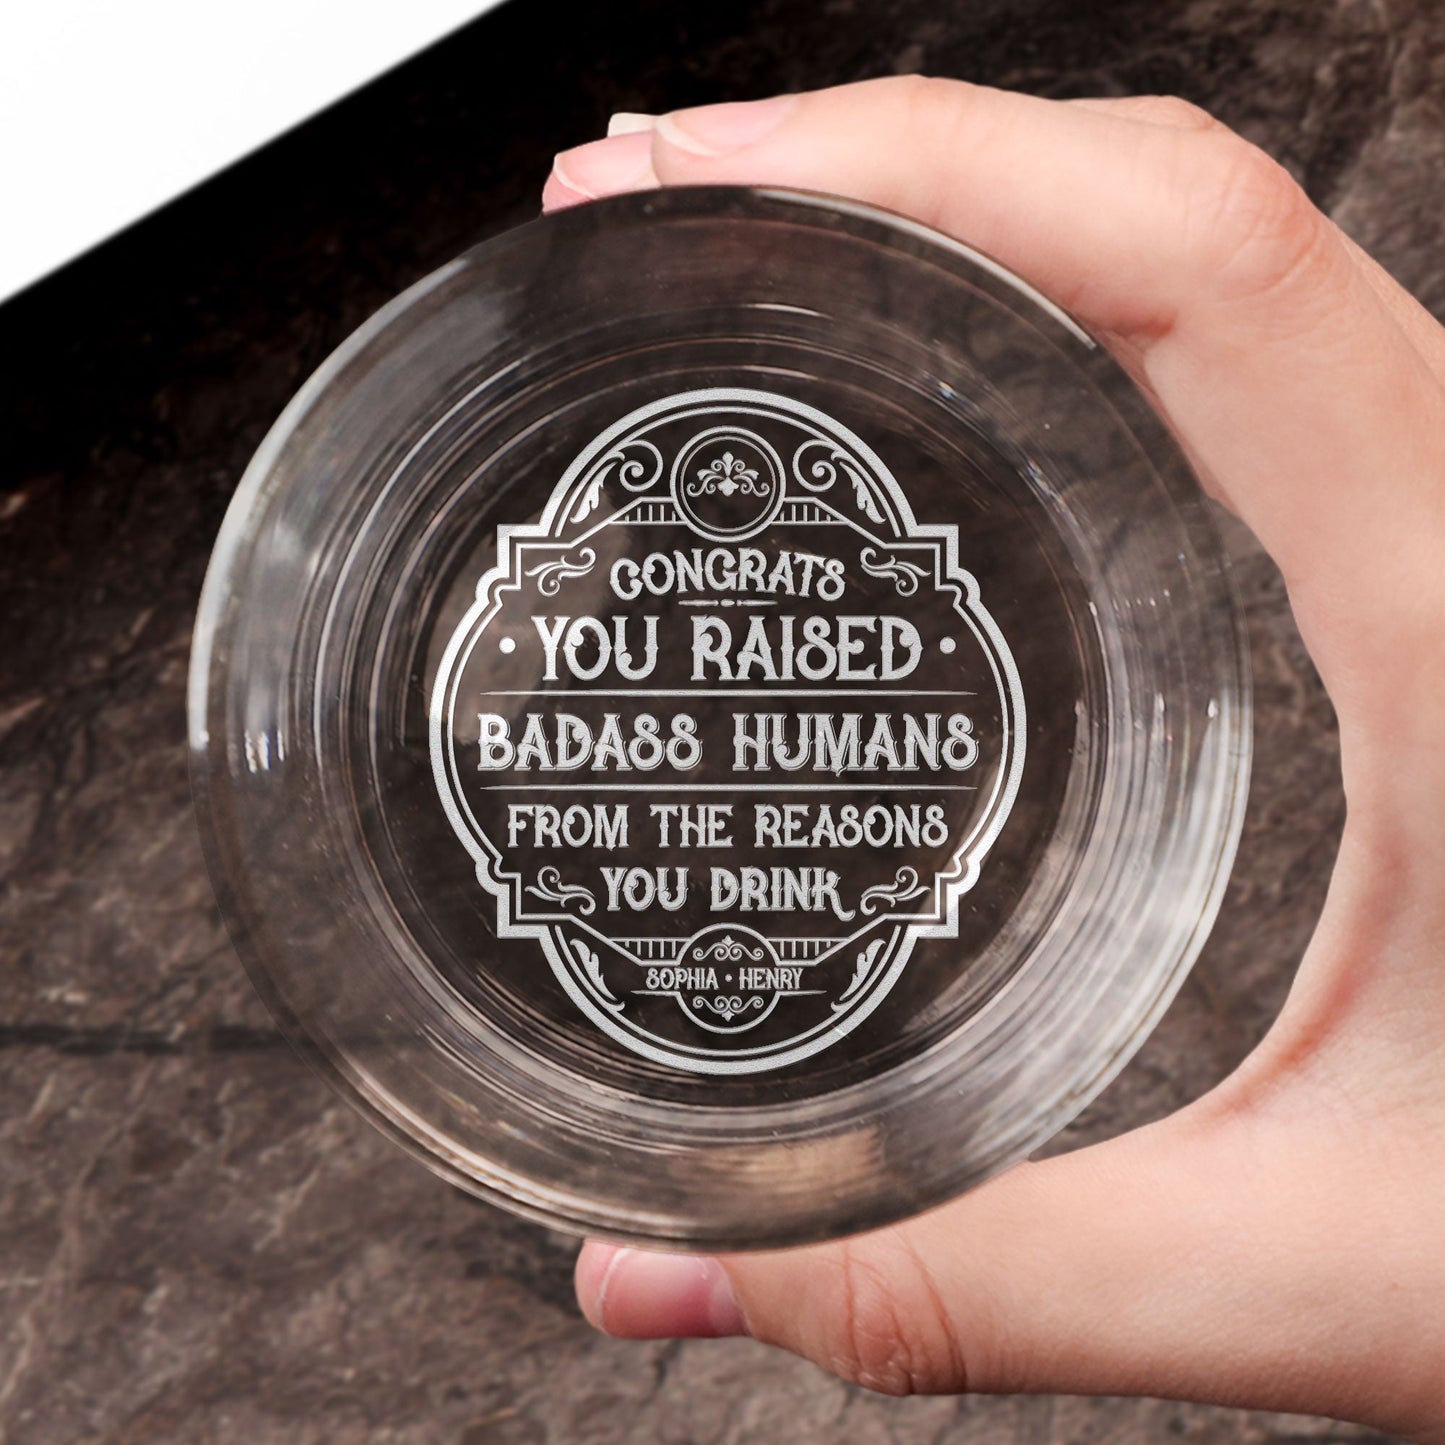 Congrats You Raised Badass Humans - Personalized Engraved Whiskey Glass